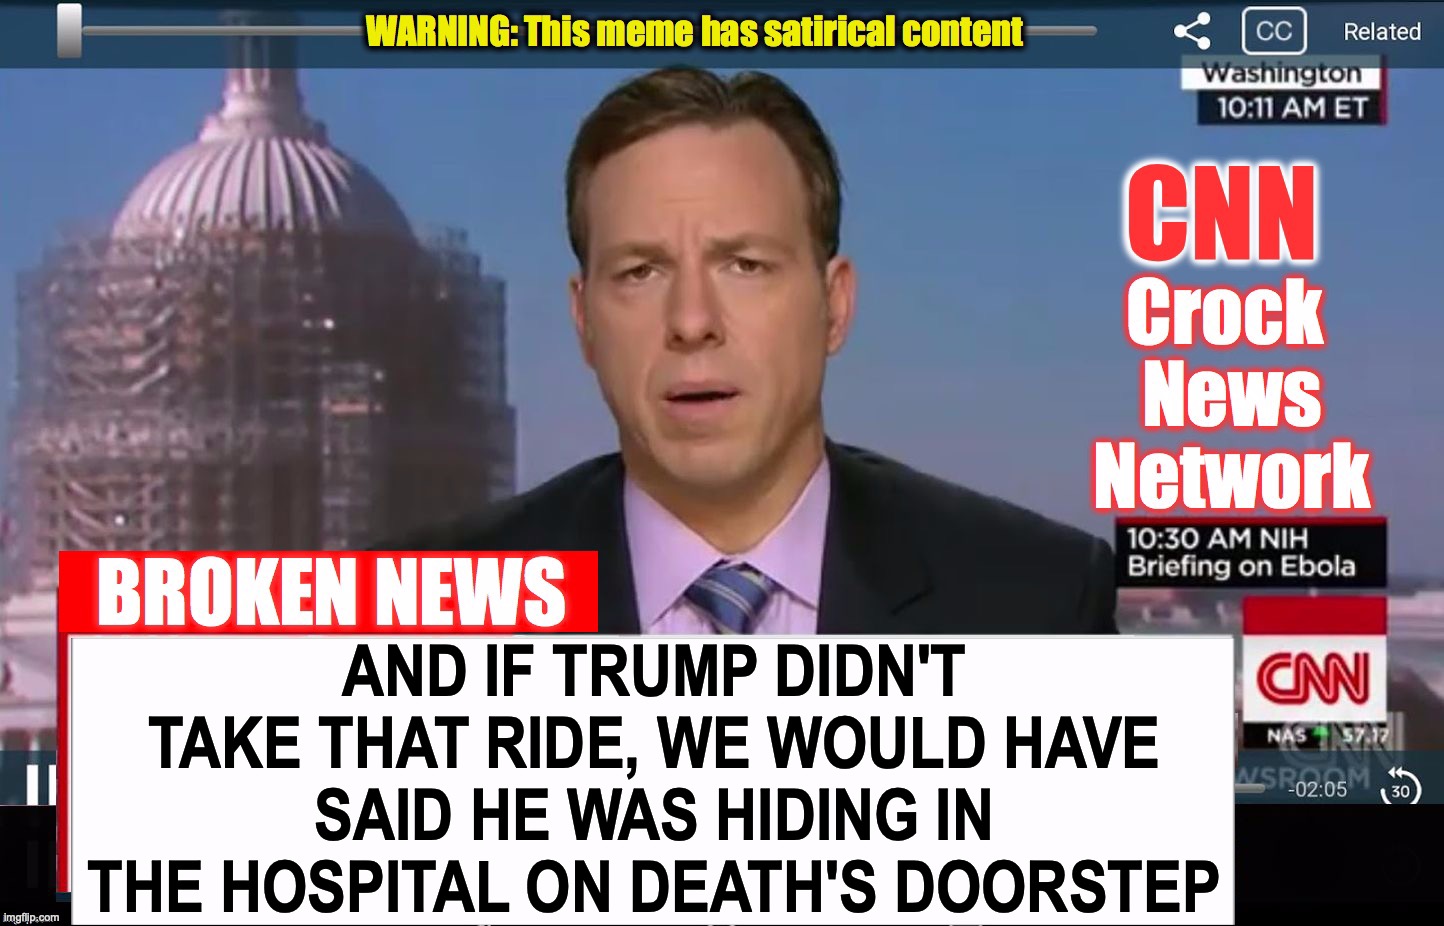 CNN Broken News  | AND IF TRUMP DIDN'T TAKE THAT RIDE, WE WOULD HAVE SAID HE WAS HIDING IN THE HOSPITAL ON DEATH'S DOORSTEP | image tagged in cnn broken news | made w/ Imgflip meme maker